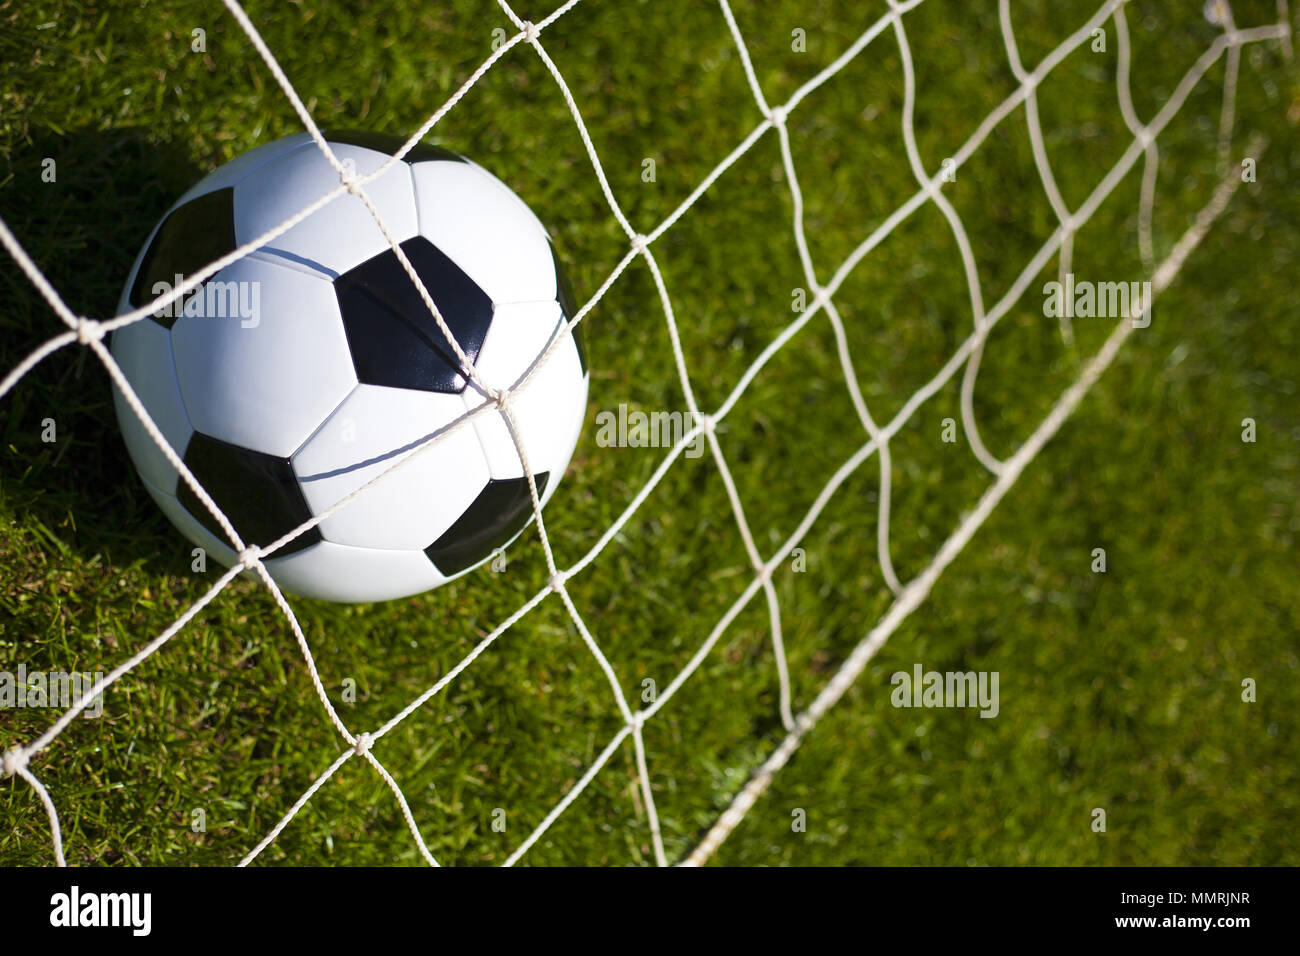 A black and white football behind a net Stock Photo